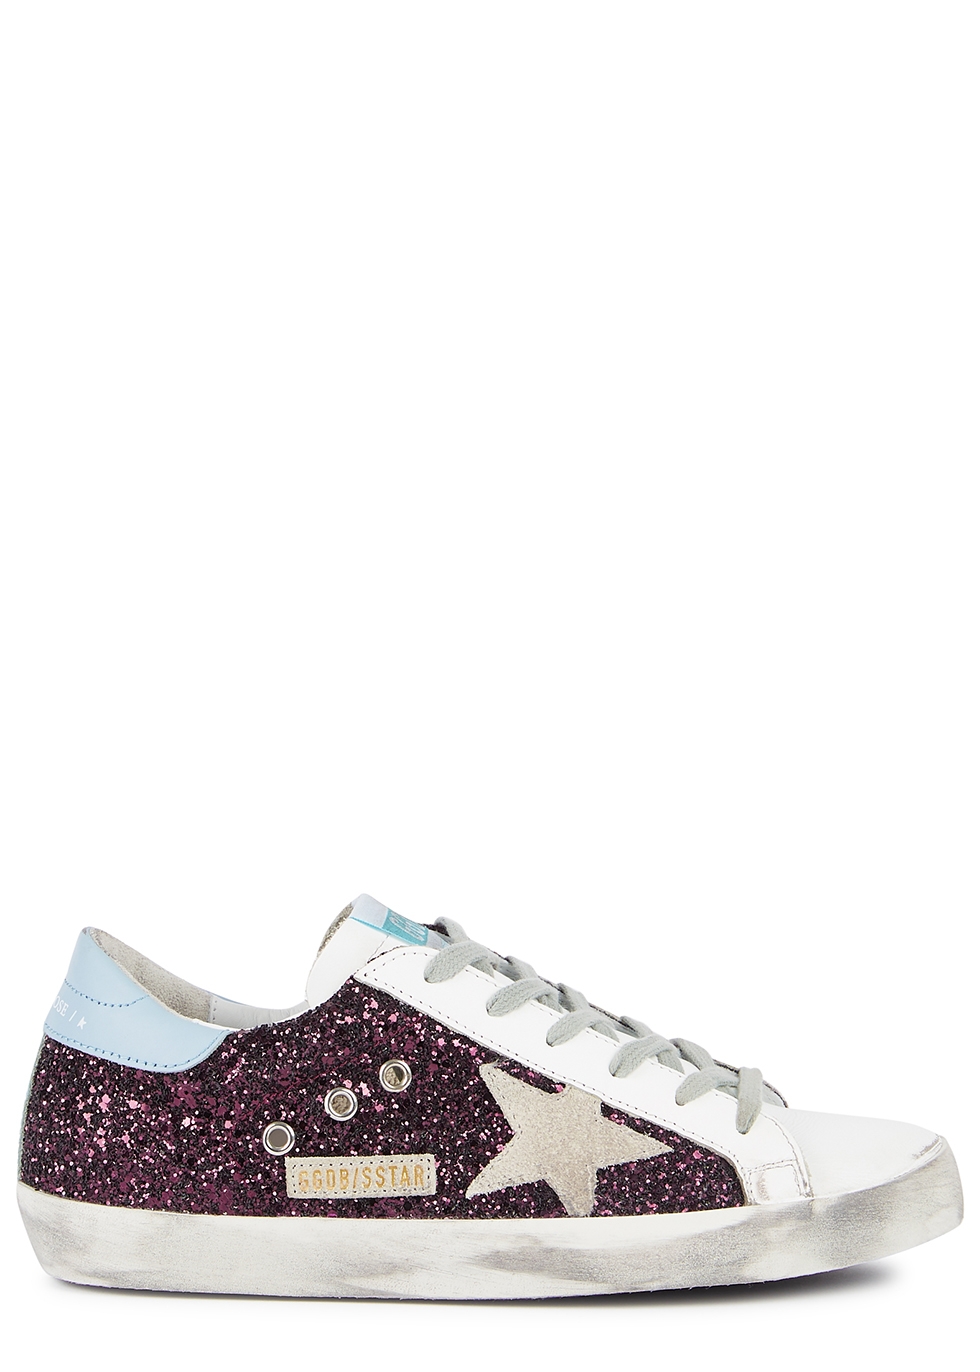 superstar glittered distressed leather sneakers